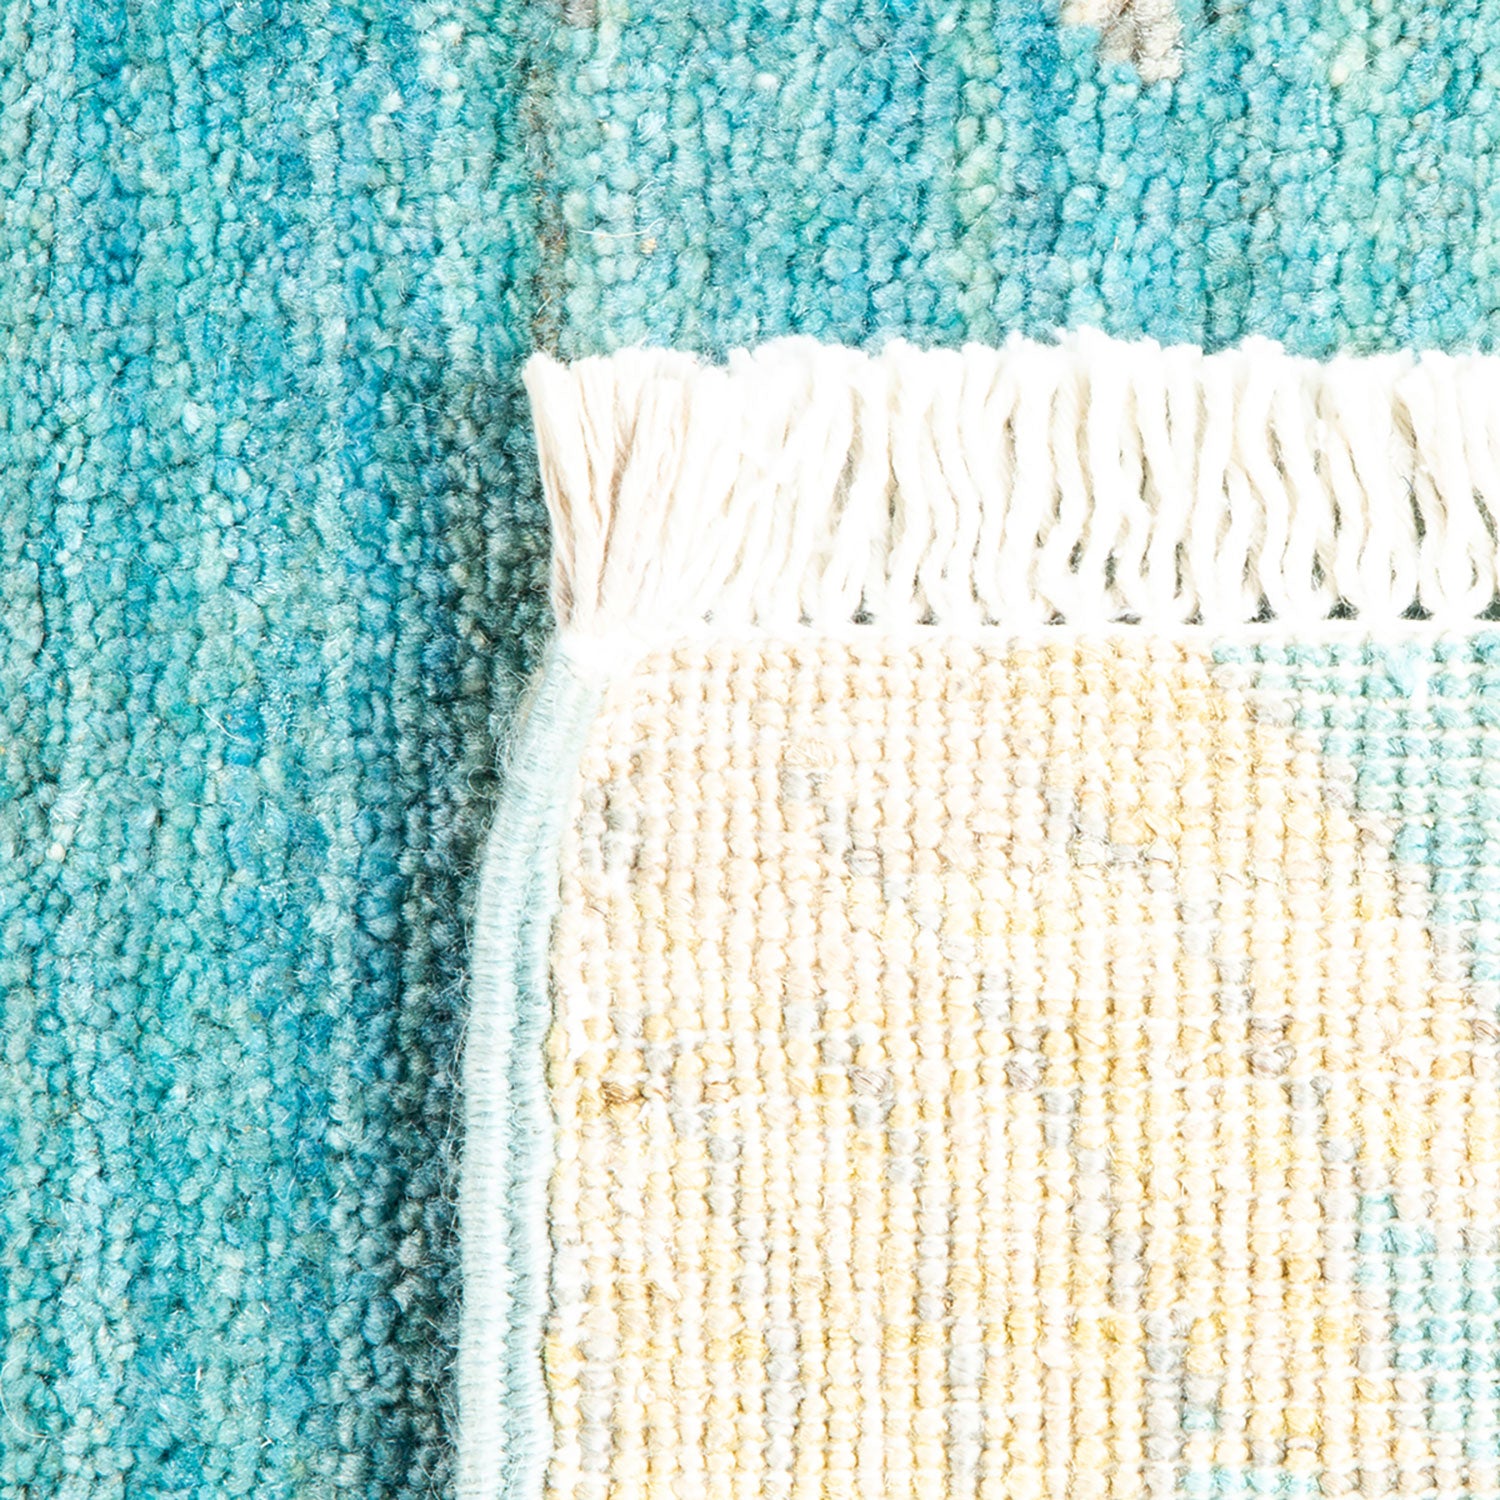 Close-up view of textile materials: dense teal carpet and loose cream fabric with fringe; contrasting textures and craftsmanship suggest handmade or unique weaving techniques.